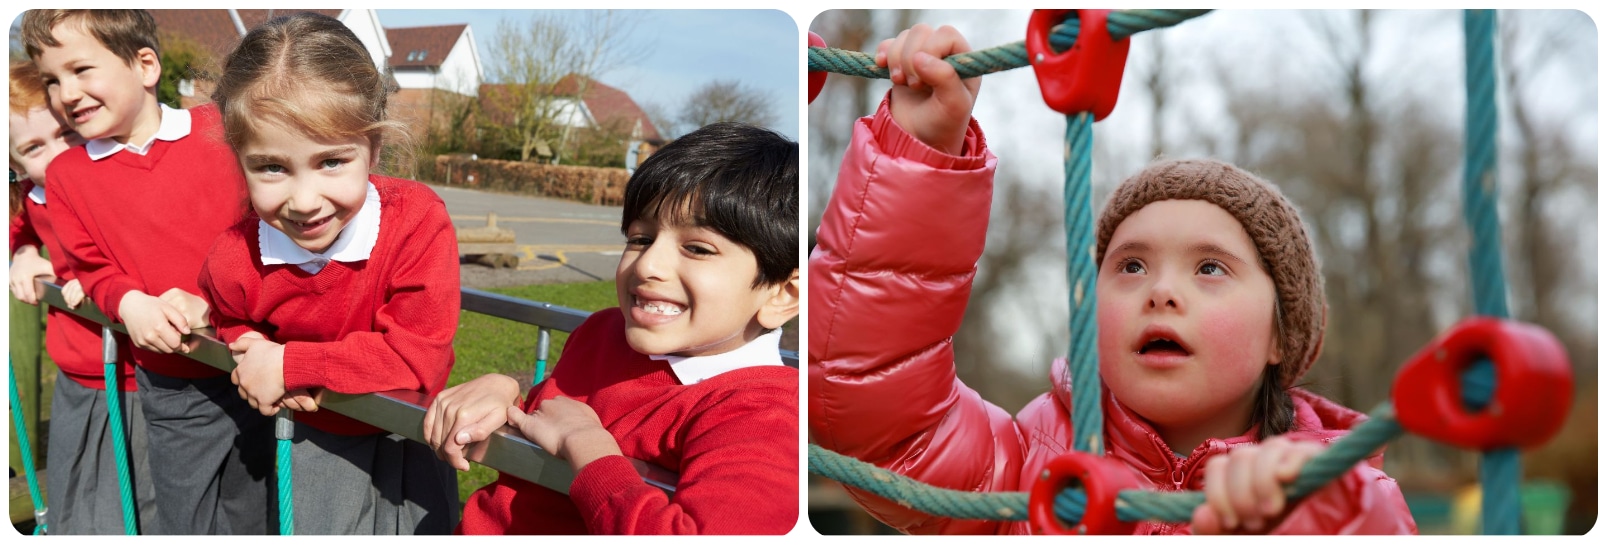 The benefits of outdoor play. Two pics, one of children on a clatterbridge, one of a girl climbing a rope net